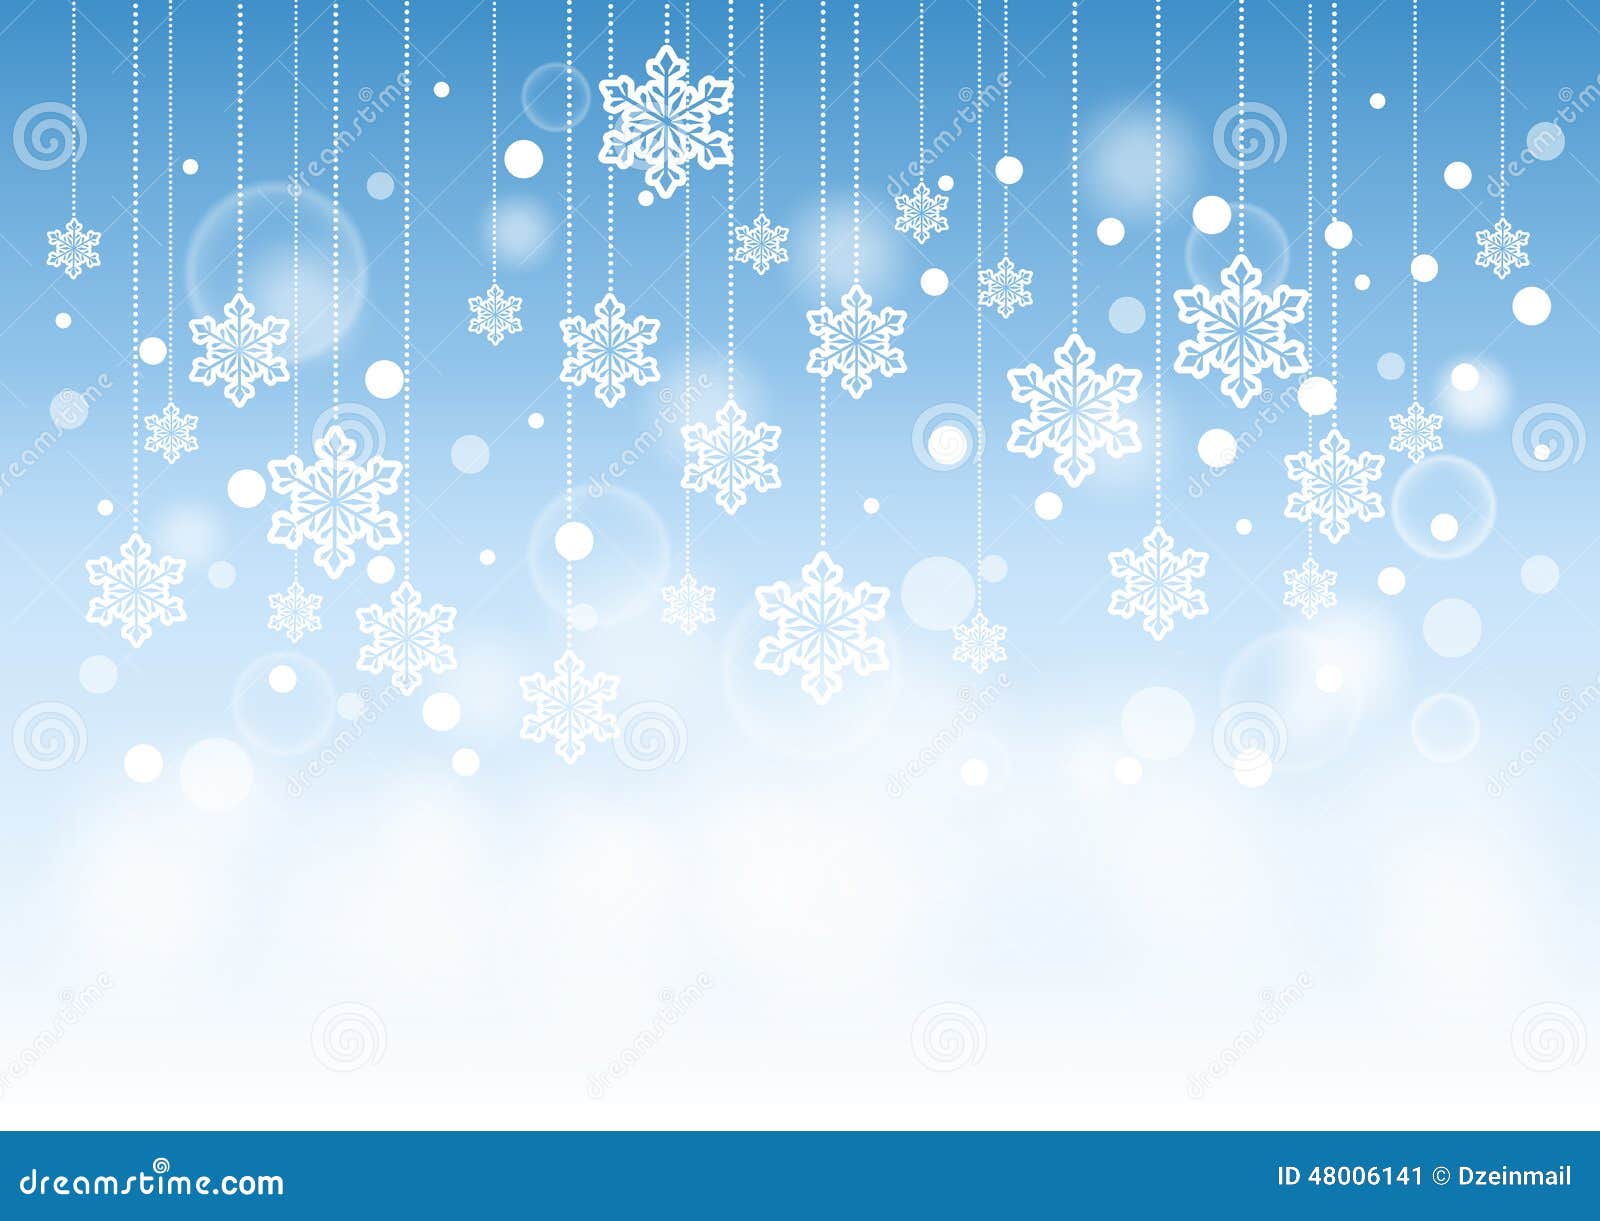 winter beautiful background with snow flakes hanging pattern